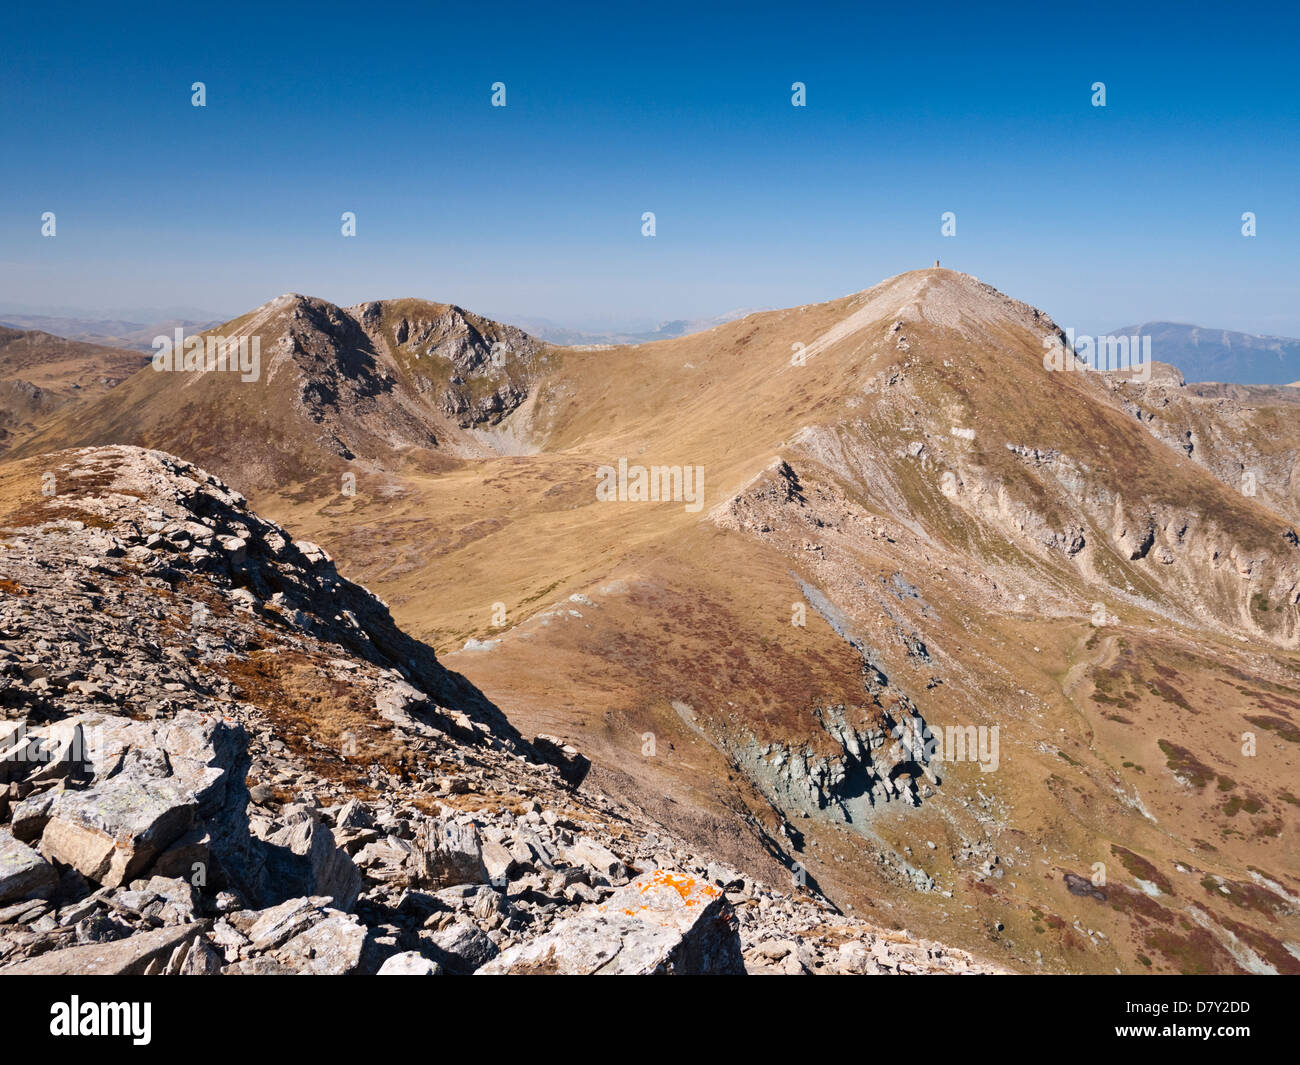 Titov Vrv (2747m) and the lower peak of Turcin, viewed from Bakardan in the Sar Planina mountains, Macedonia Stock Photo